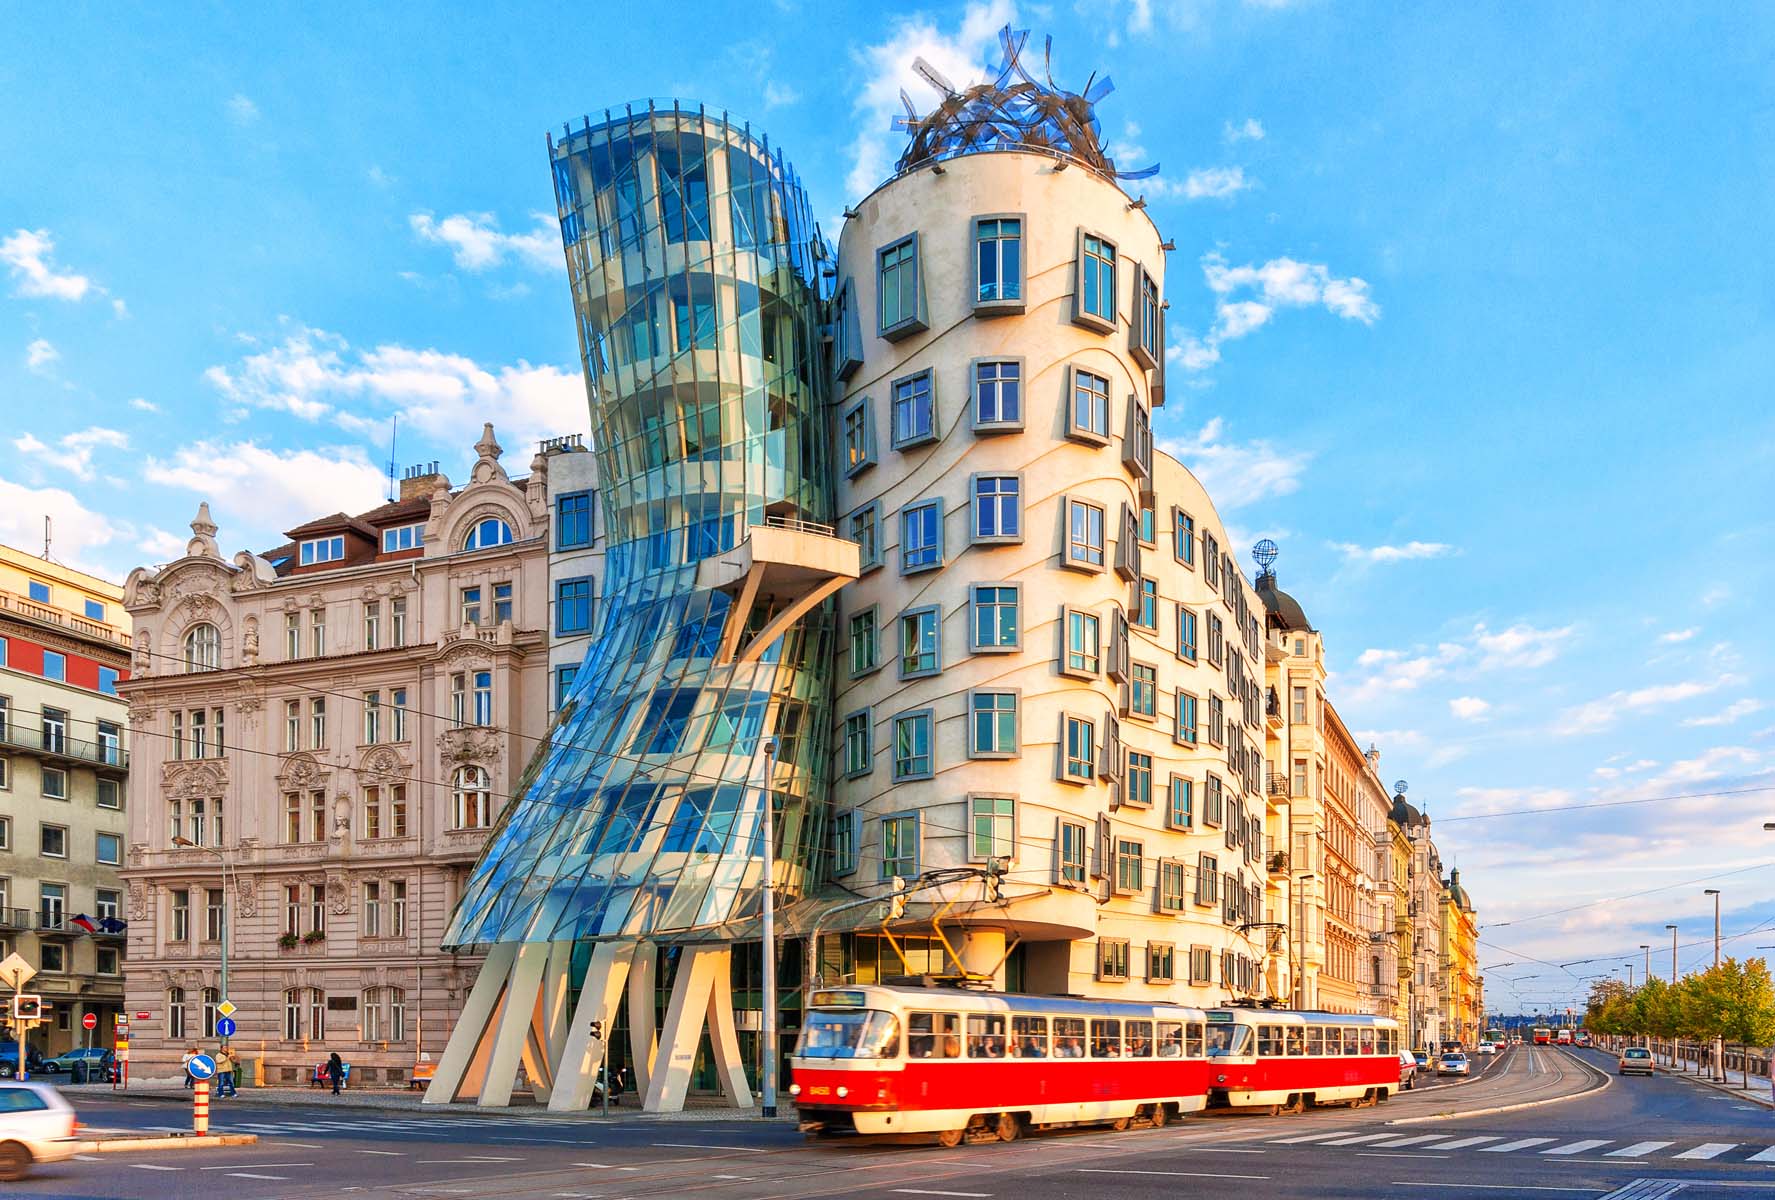 PRAGUE, CZECH REPUBLIC - AUGUST 13, 2016: Dancing house or Fred and Ginger building in downtown Prague, Czech Republic. Built by Vlado Milunic and Frank Gehry in 1992-1996.